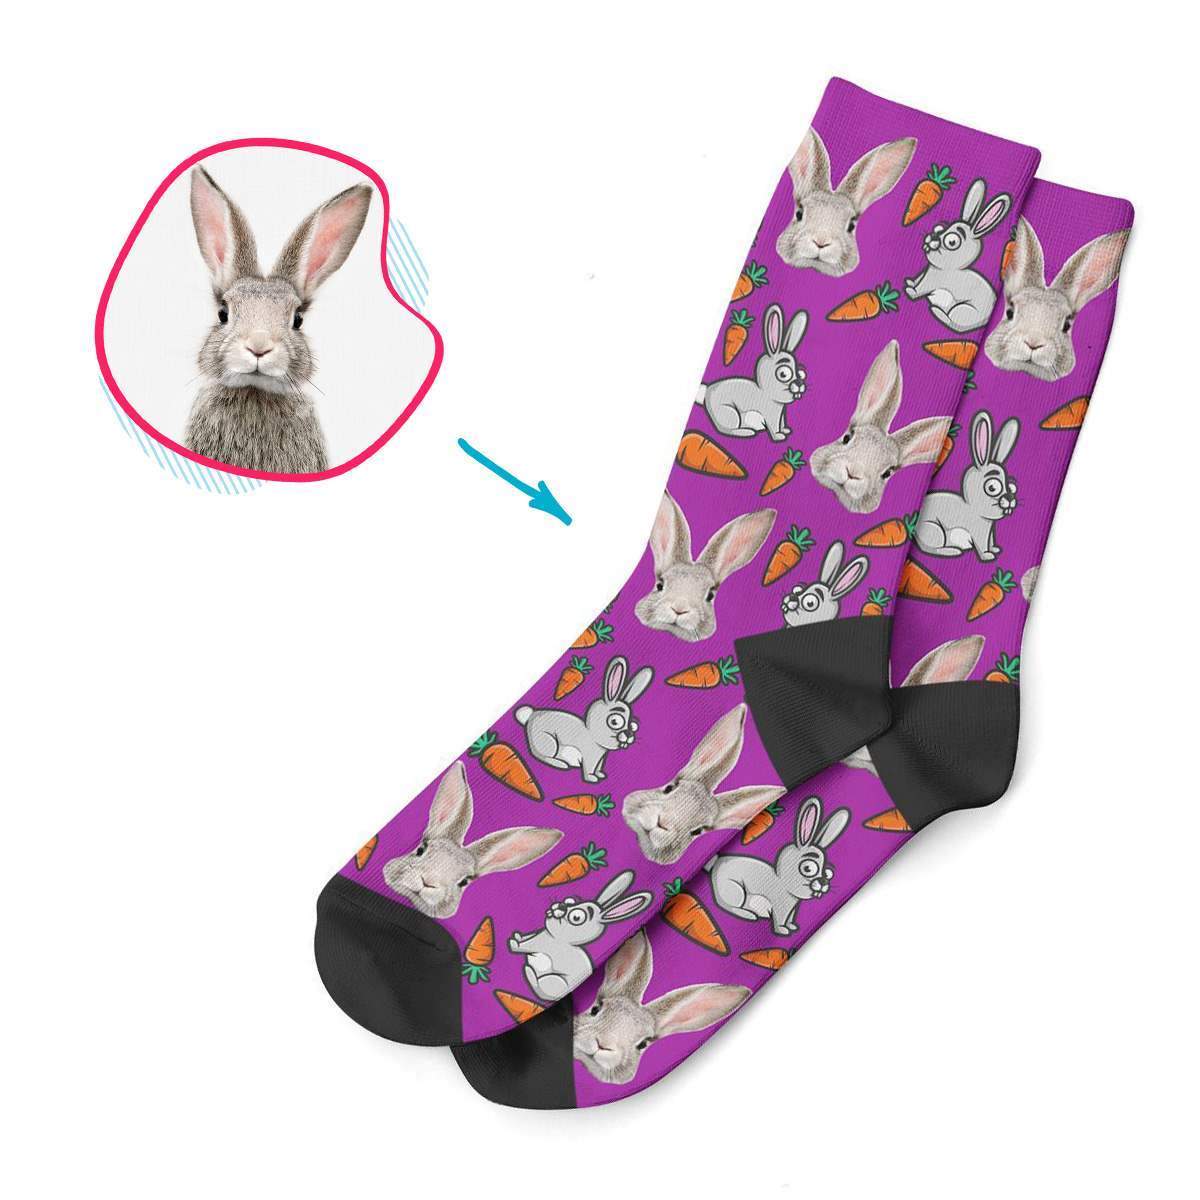 purple Bunny socks personalized with photo of face printed on them